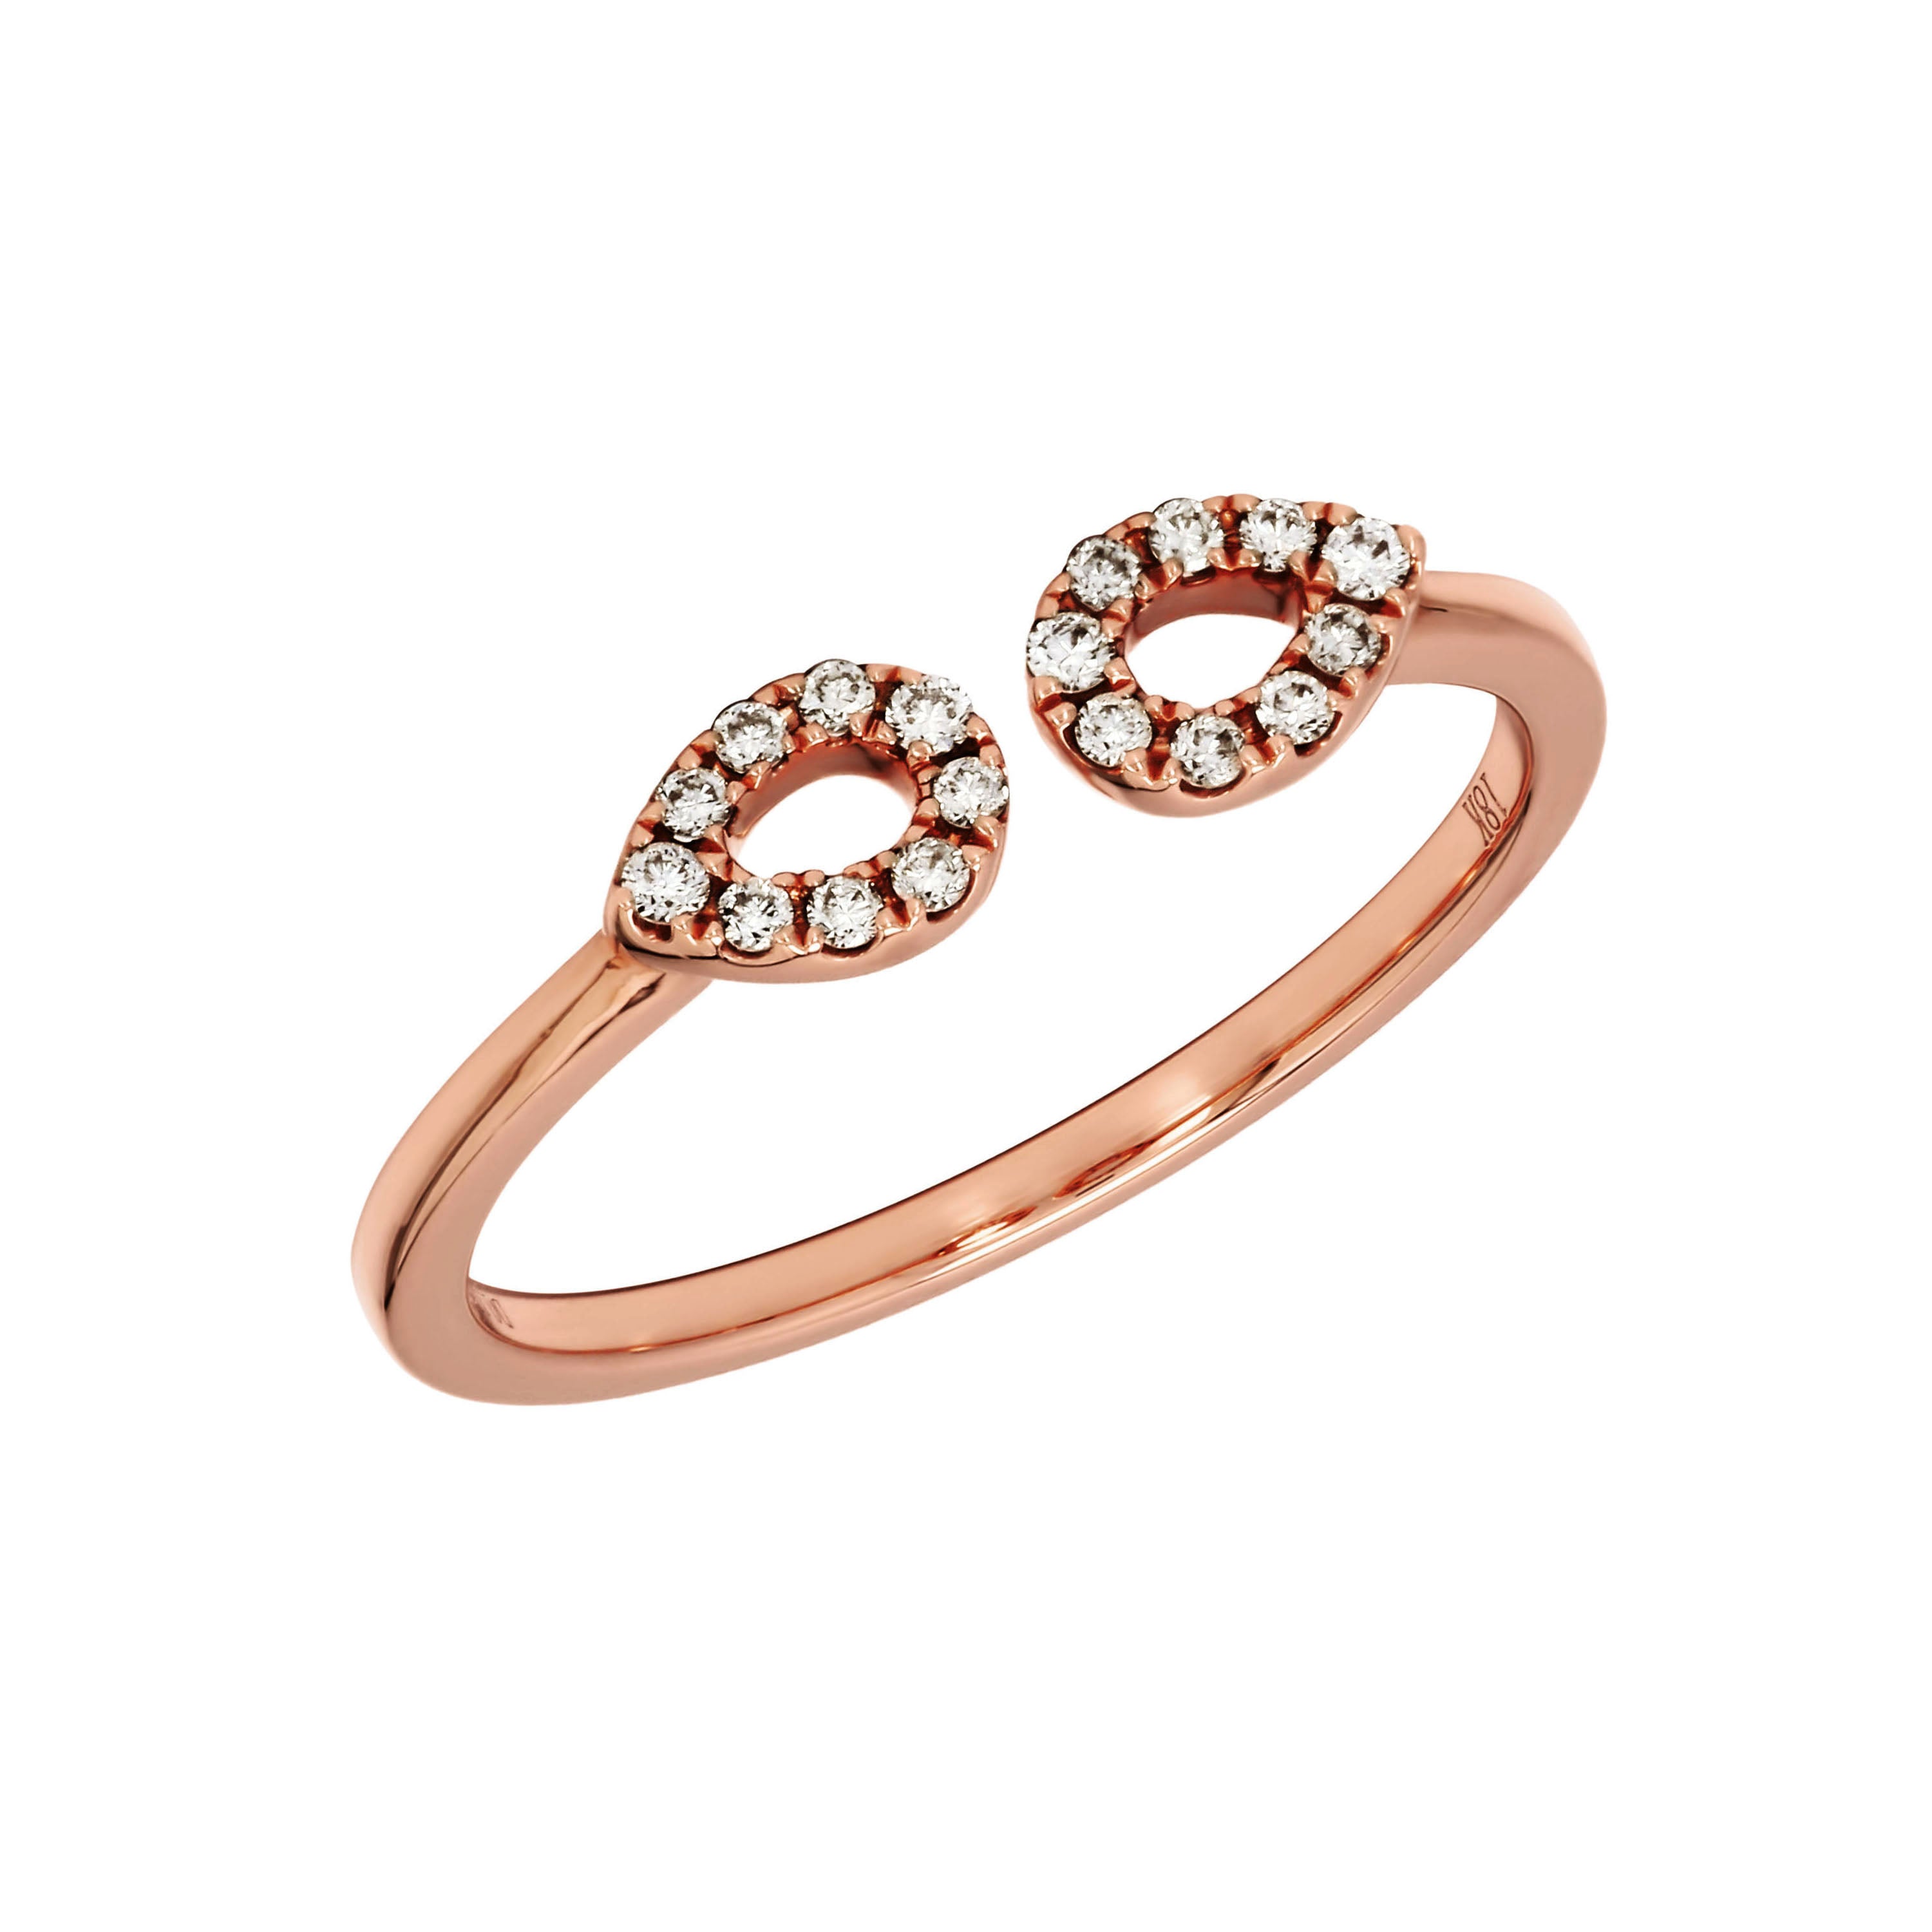 Adamar Jewels Double drop Ring in 18K rose gold set with diamonds